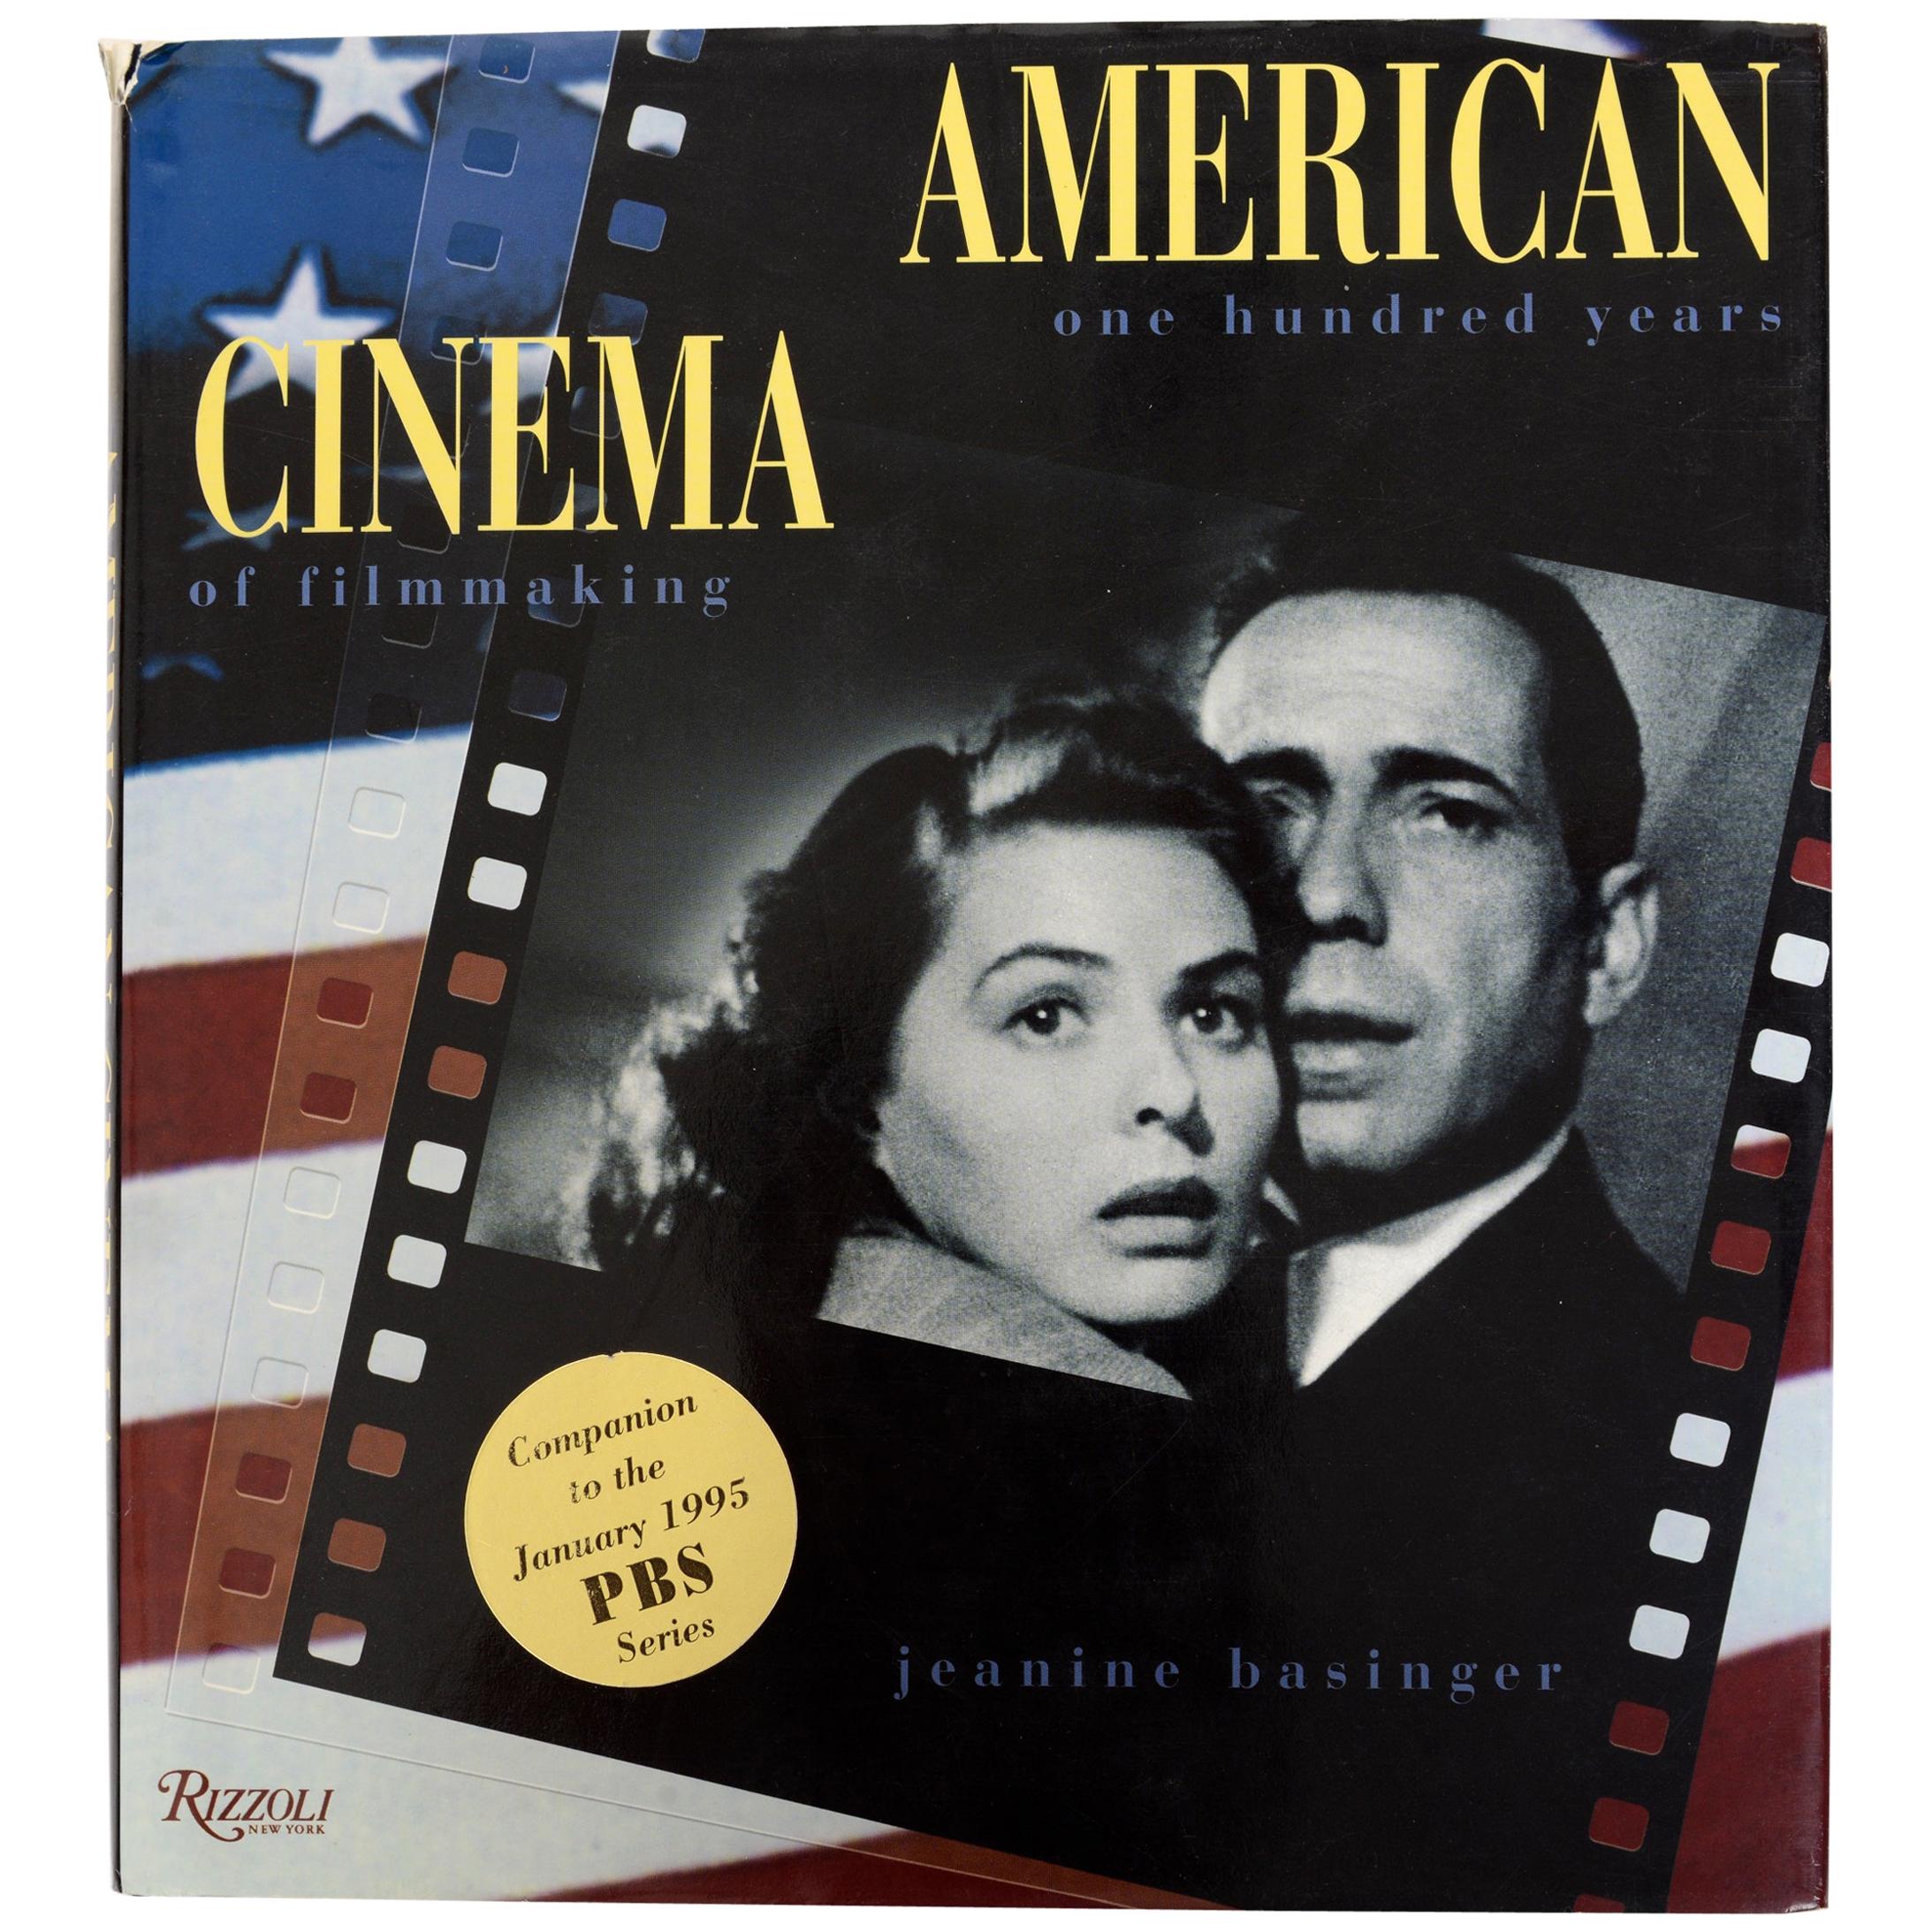 American Cinema One Hundred Years of Filmmaking by Jeanine Basinger 1st Ed For Sale